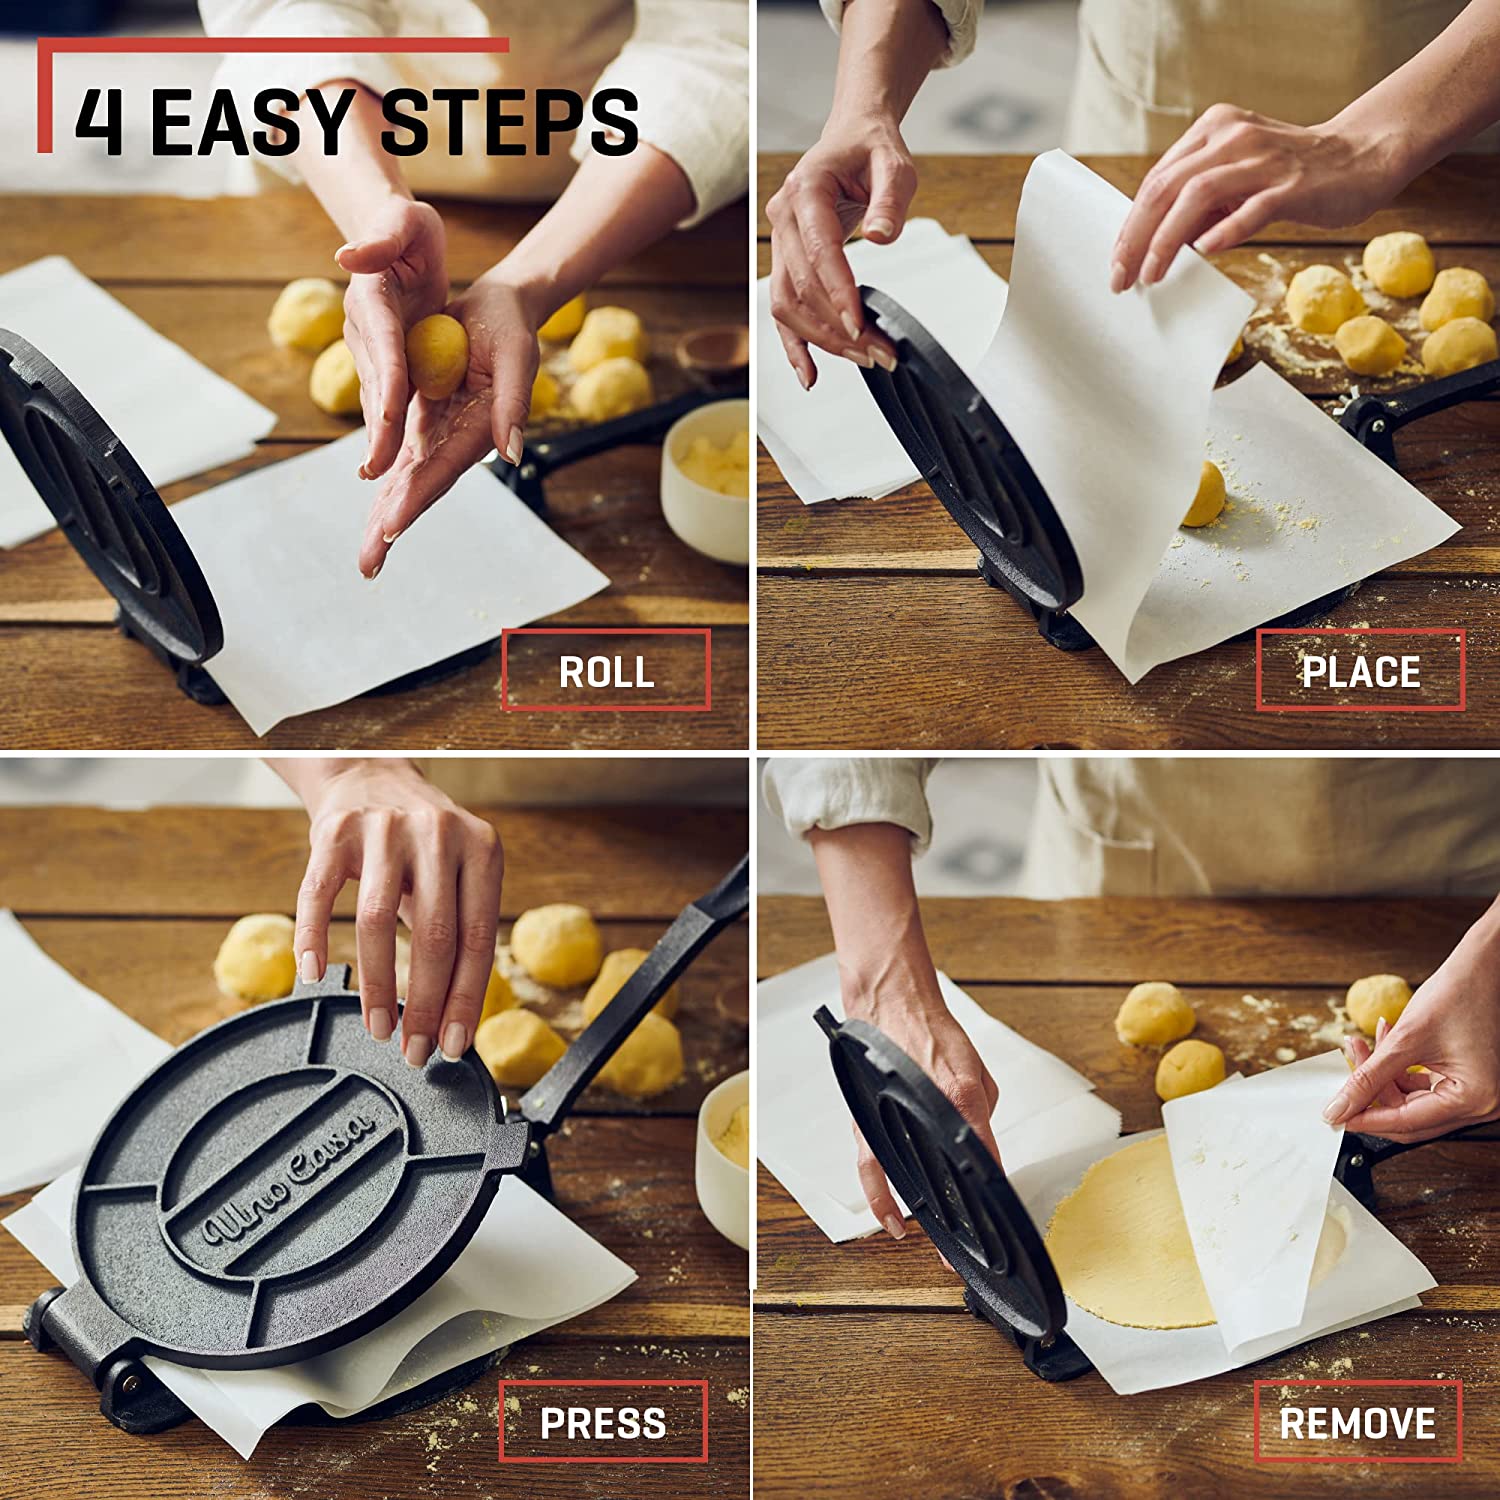 4 Grid Images of how to use a Quesadilla & Tortilla Maker